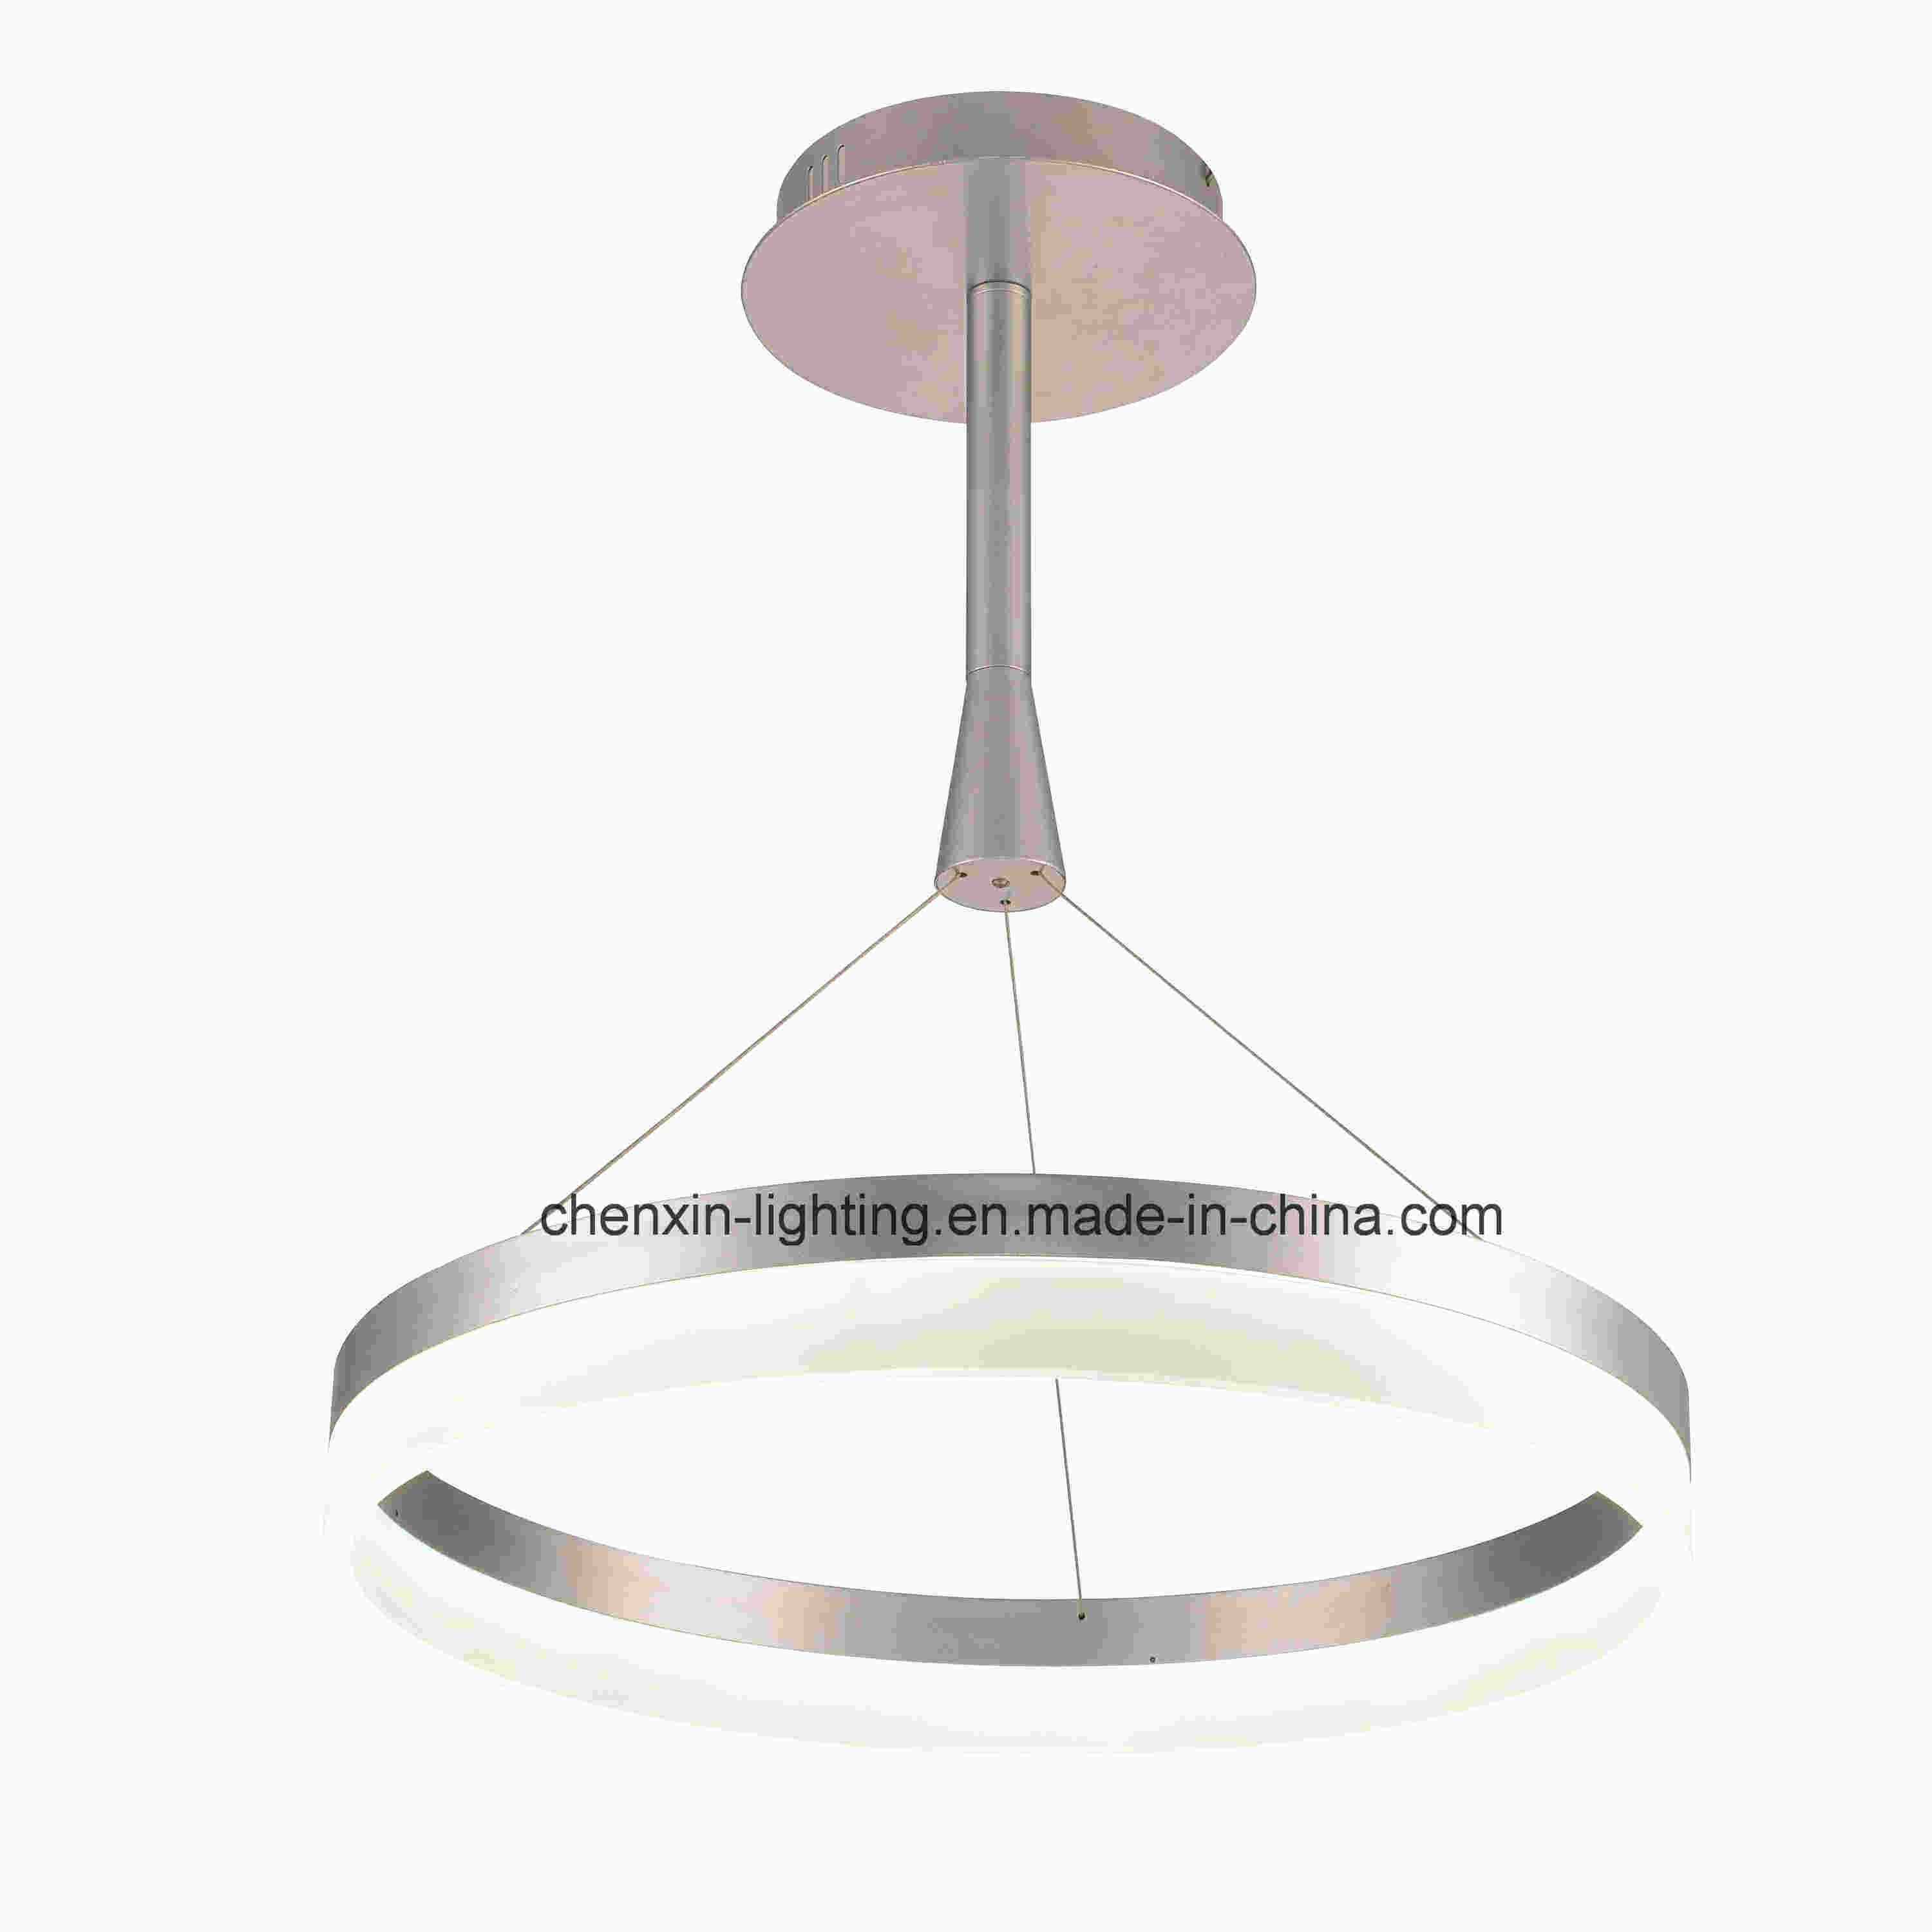 Competitive Large Acrylic Pendant Lighting Direct From China